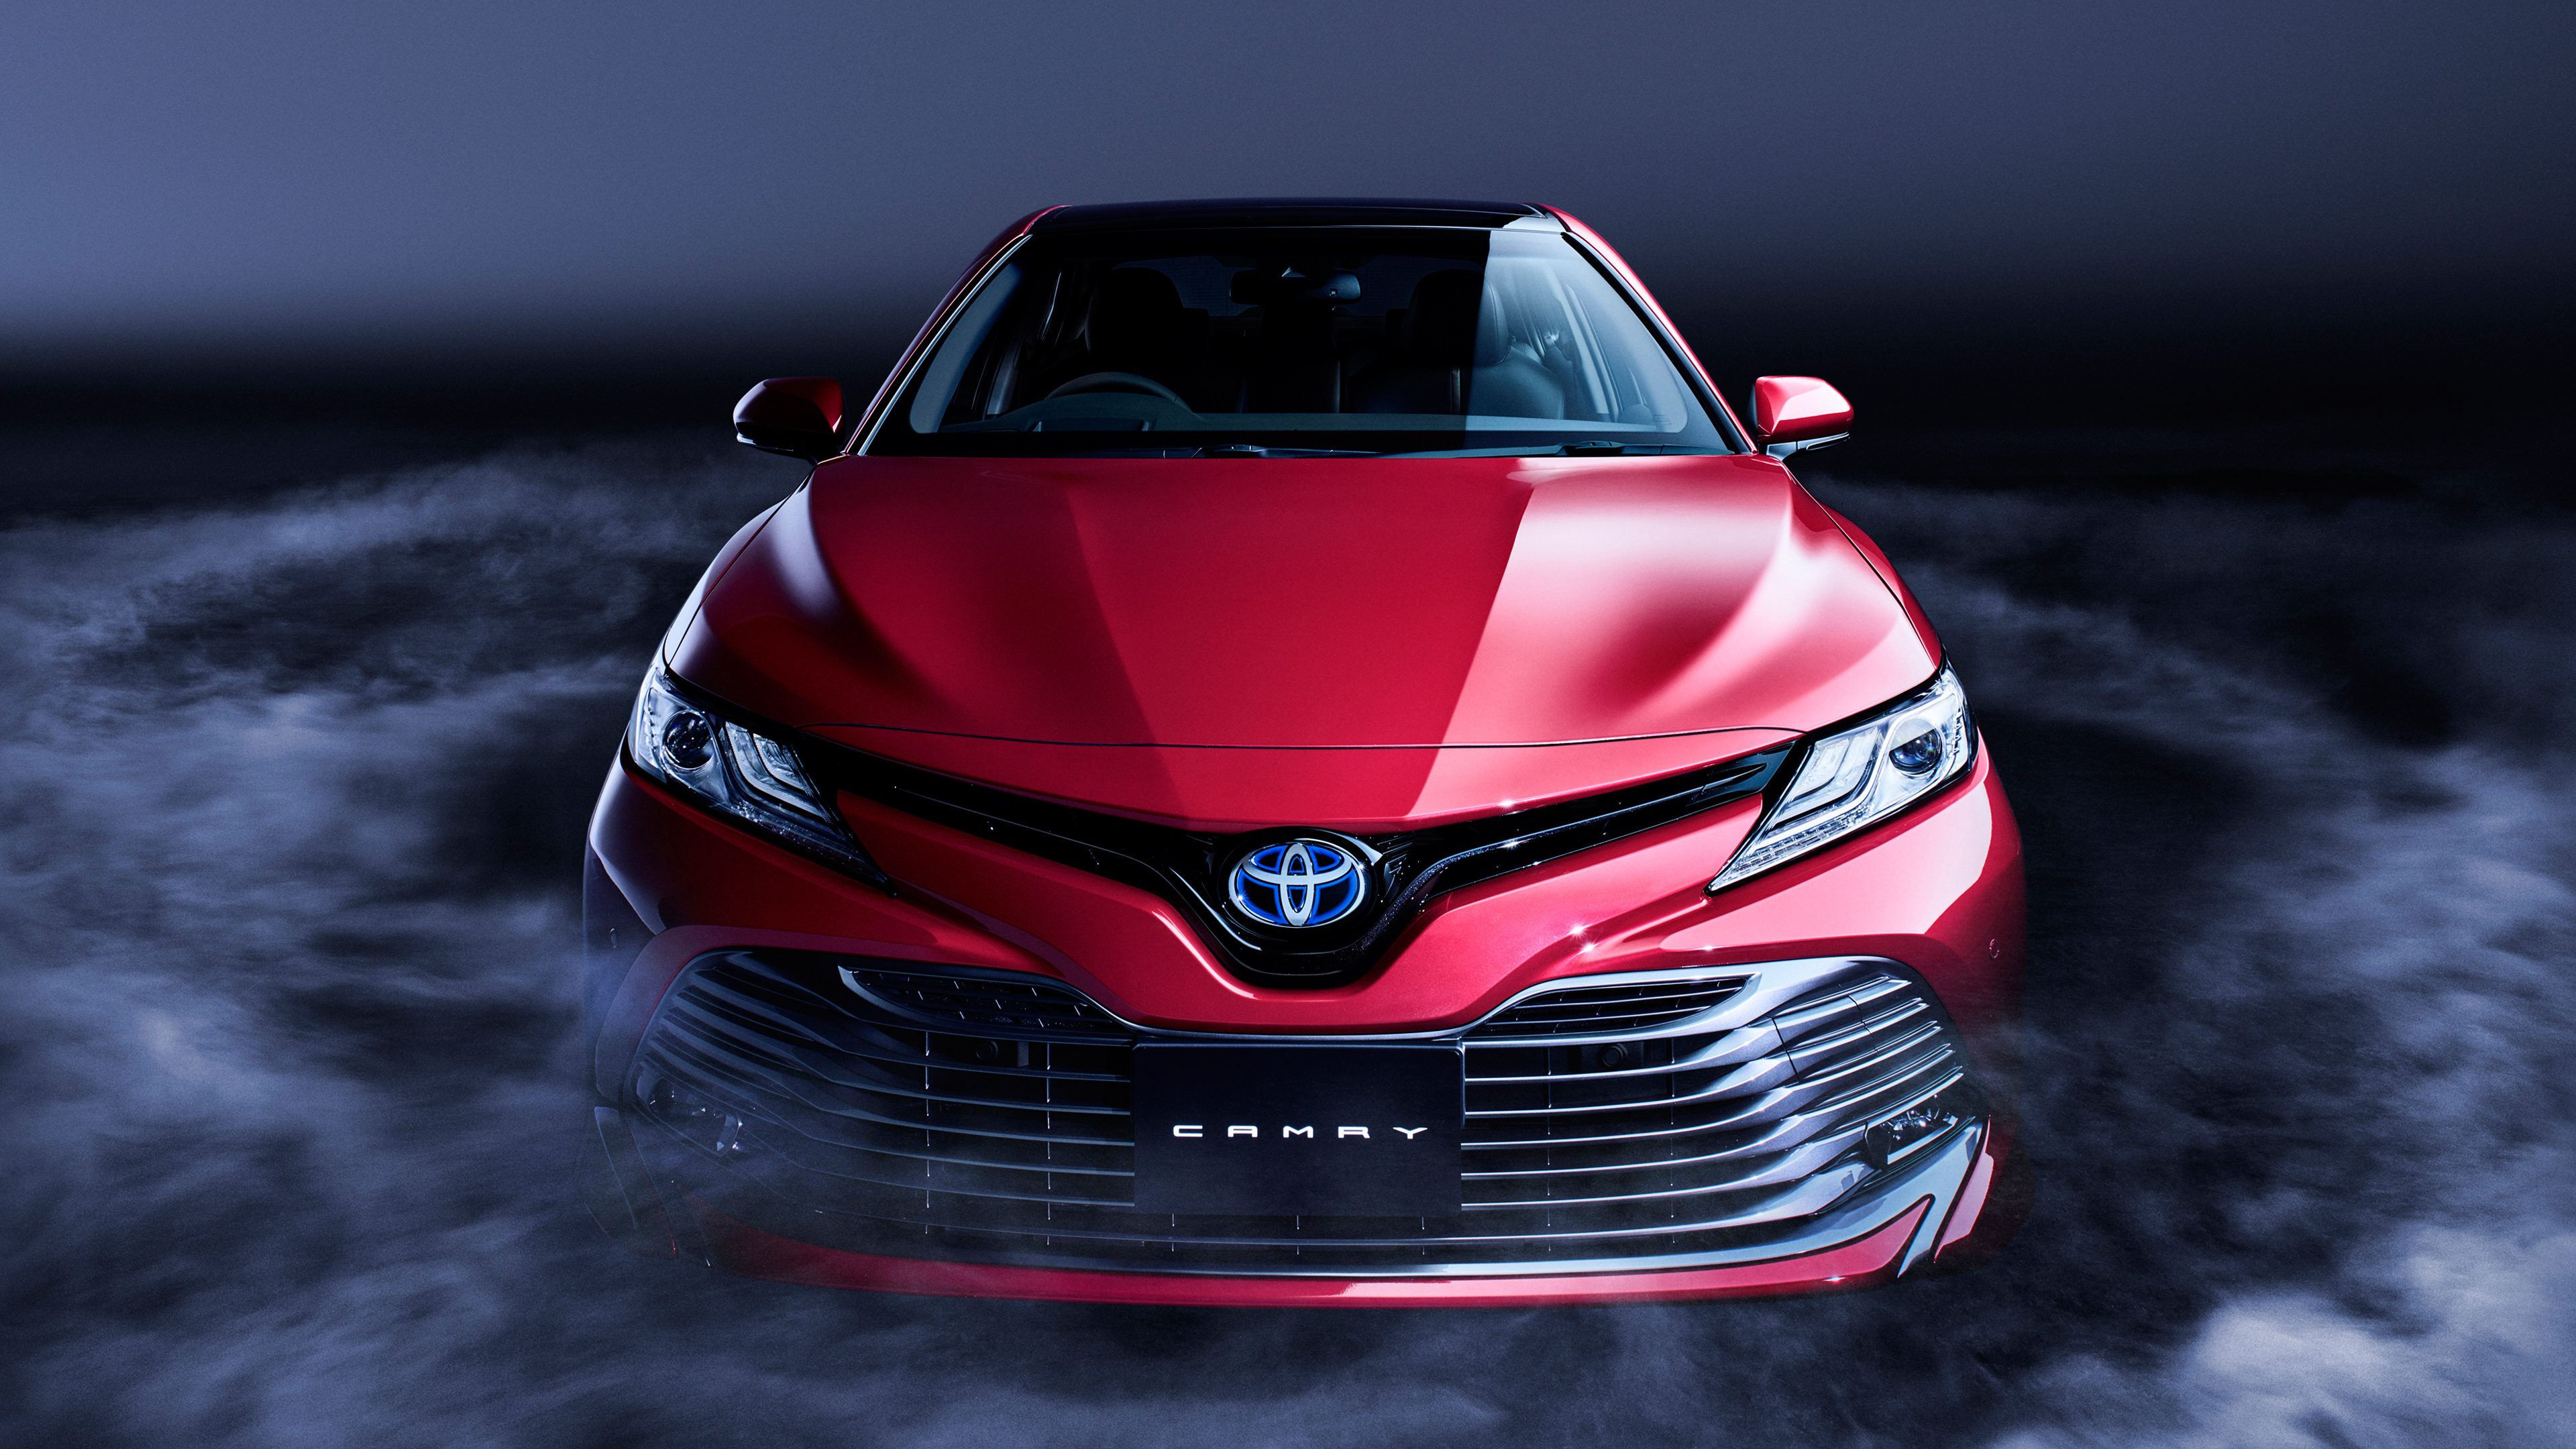 Toyota Camry 2018 4k, HD Cars, 4k Wallpapers, Images ...